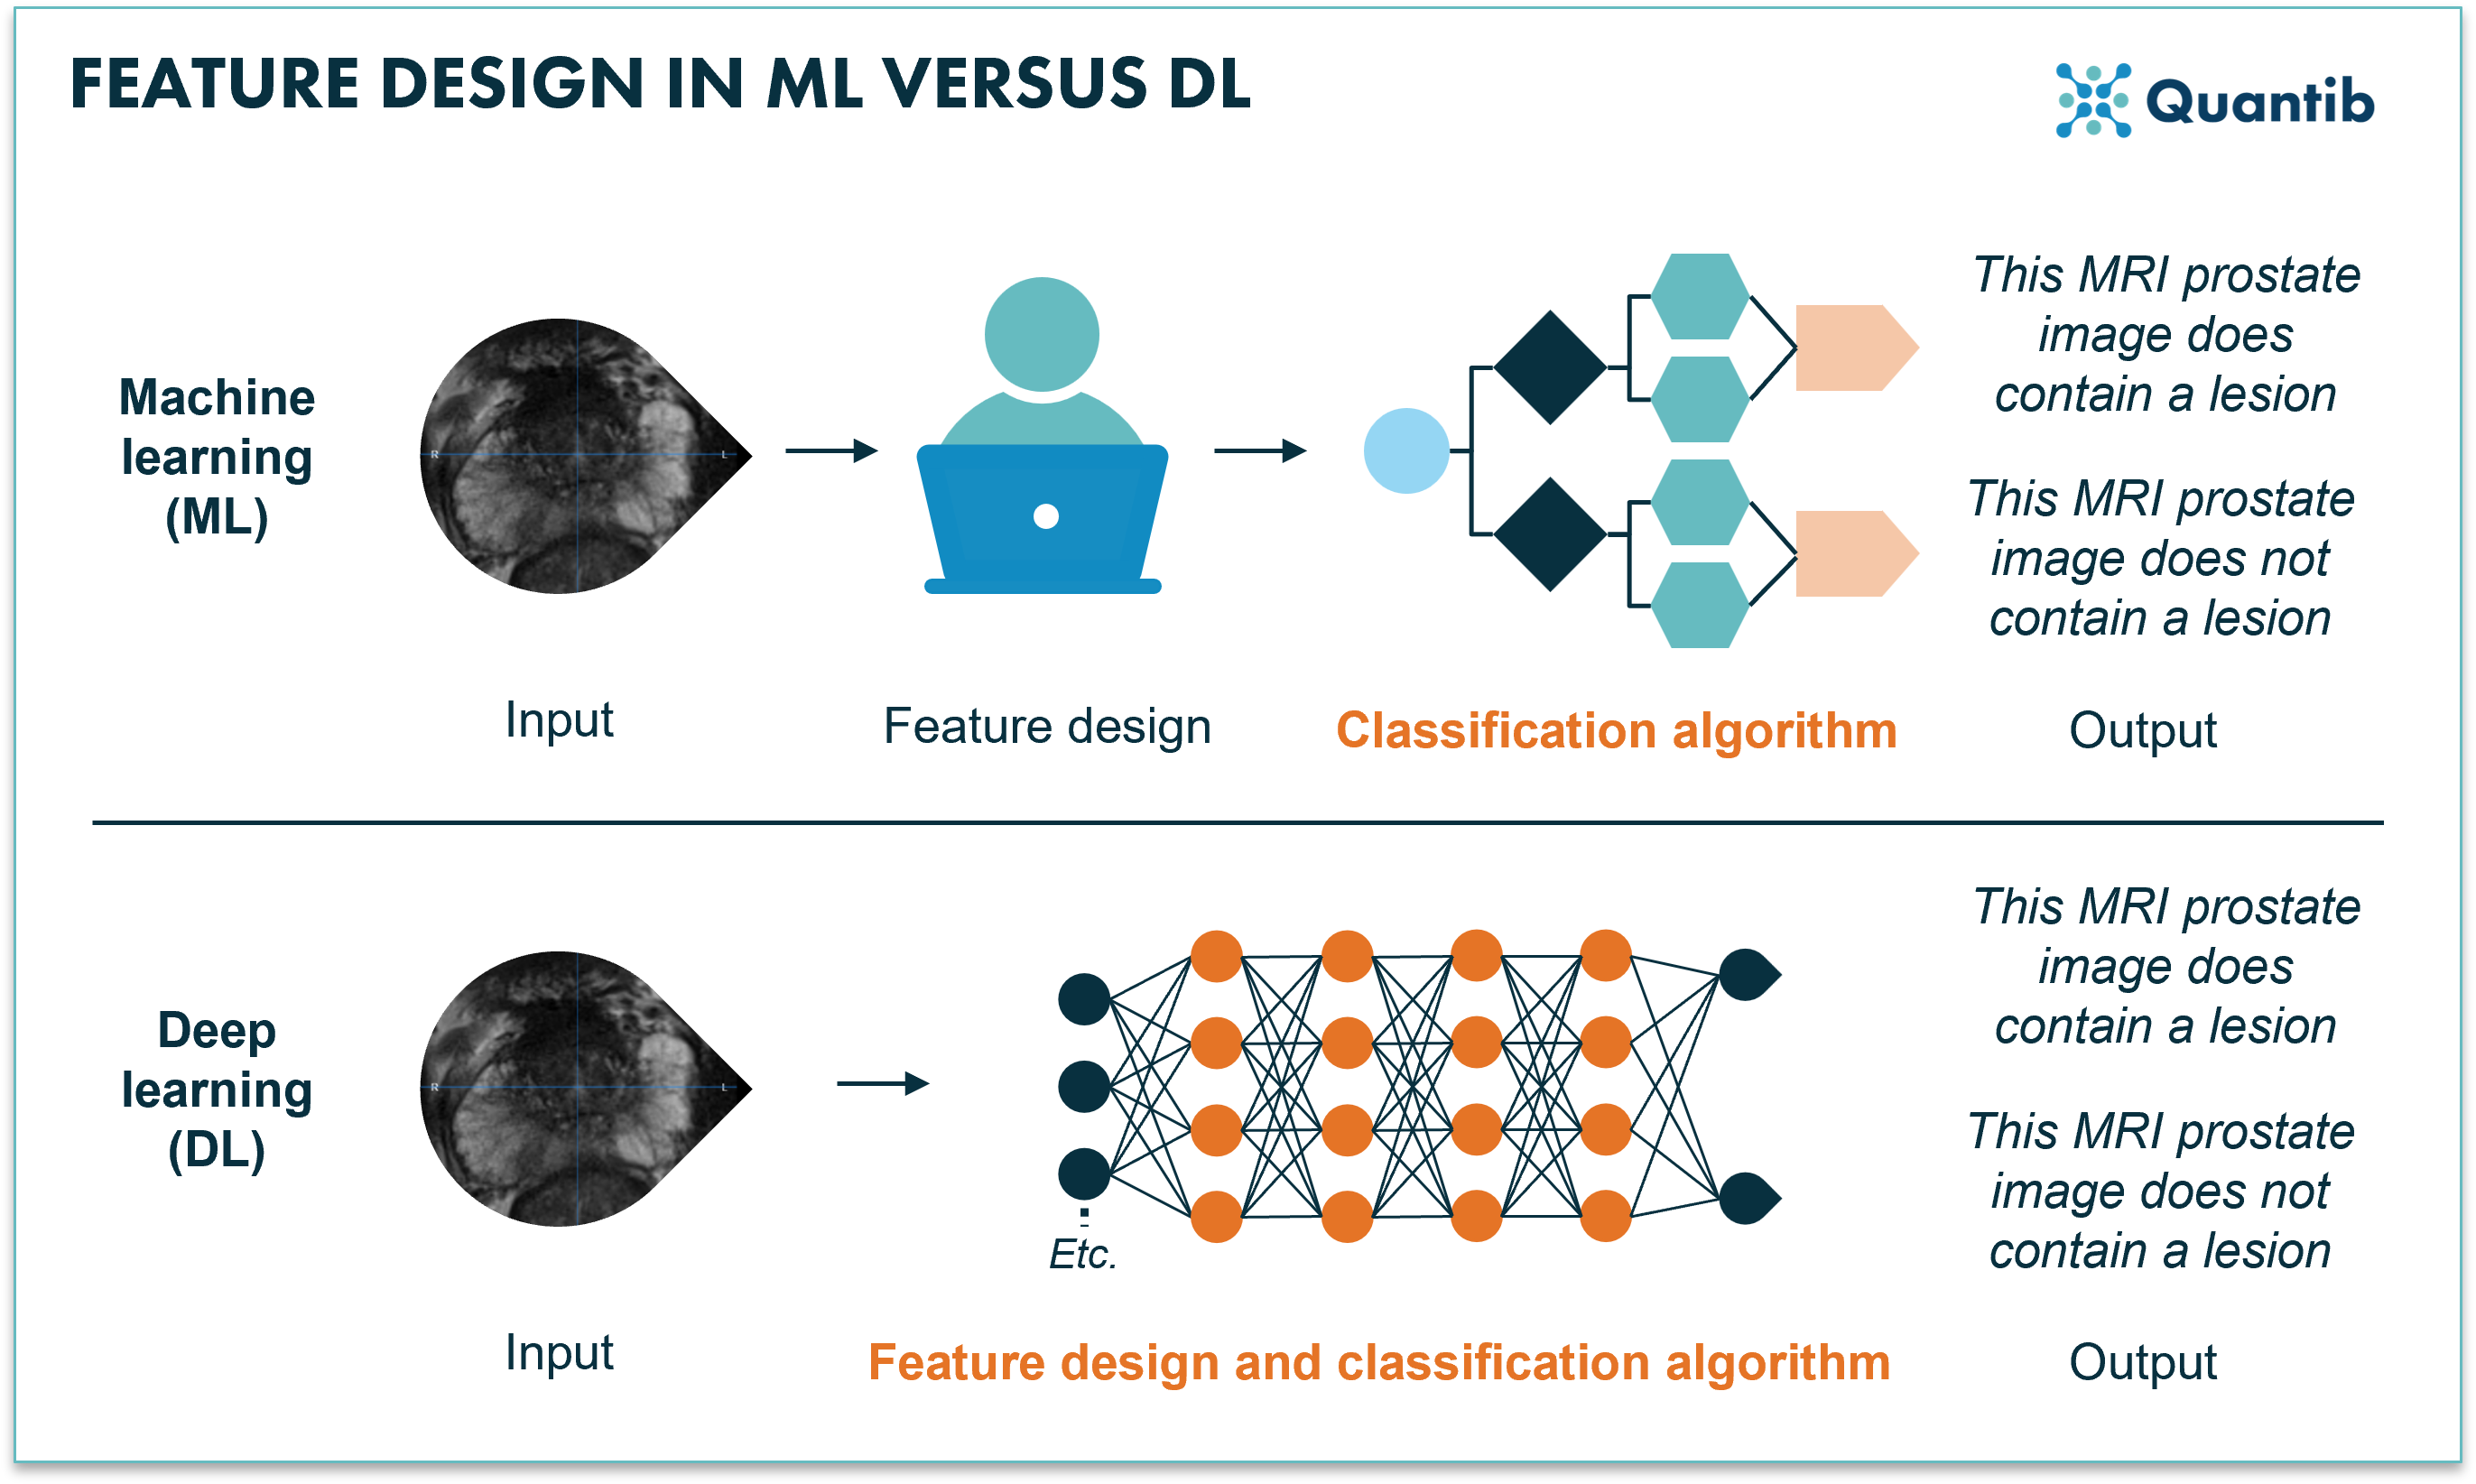 Feature design in machine learning versus deep learning